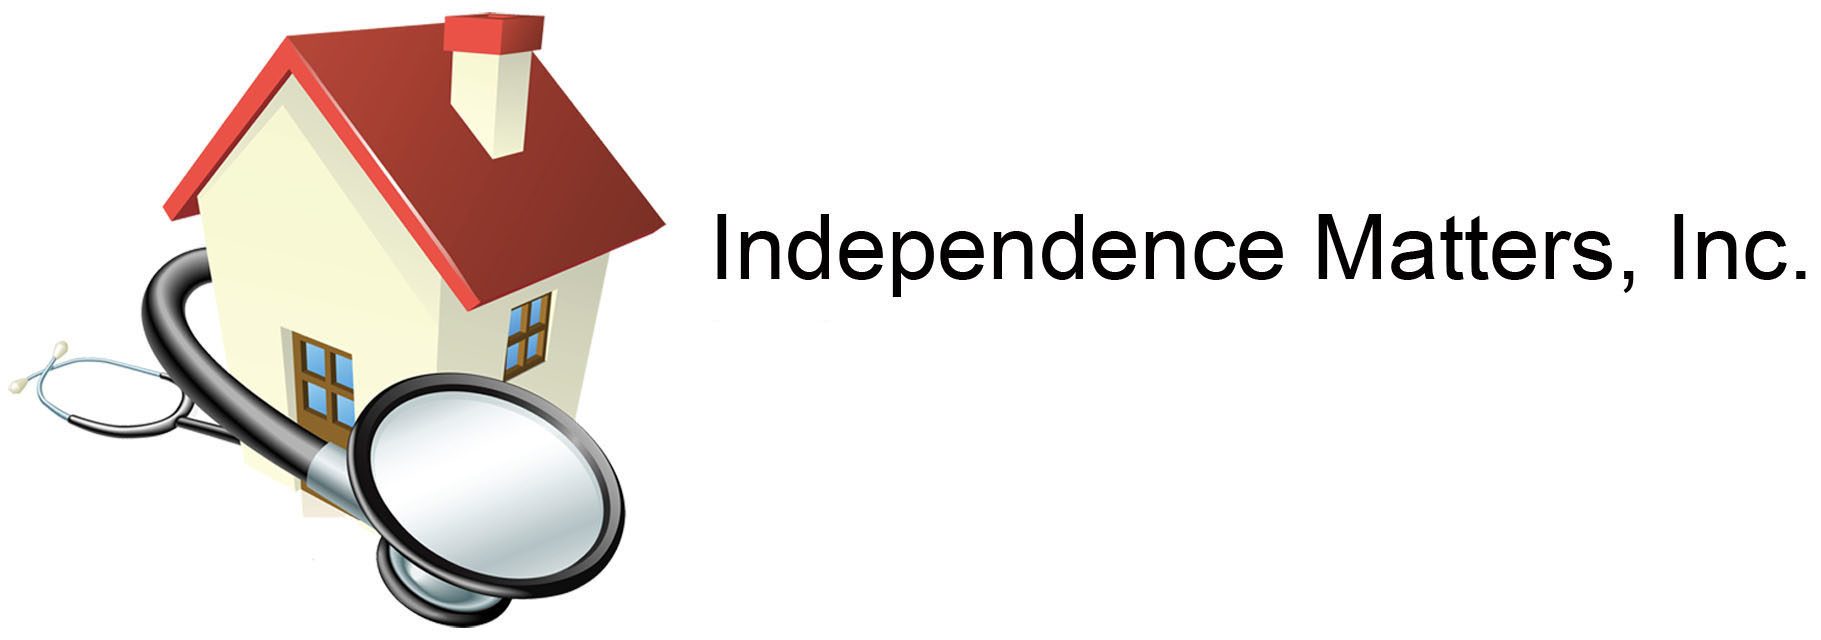 Independence Matters, Inc.